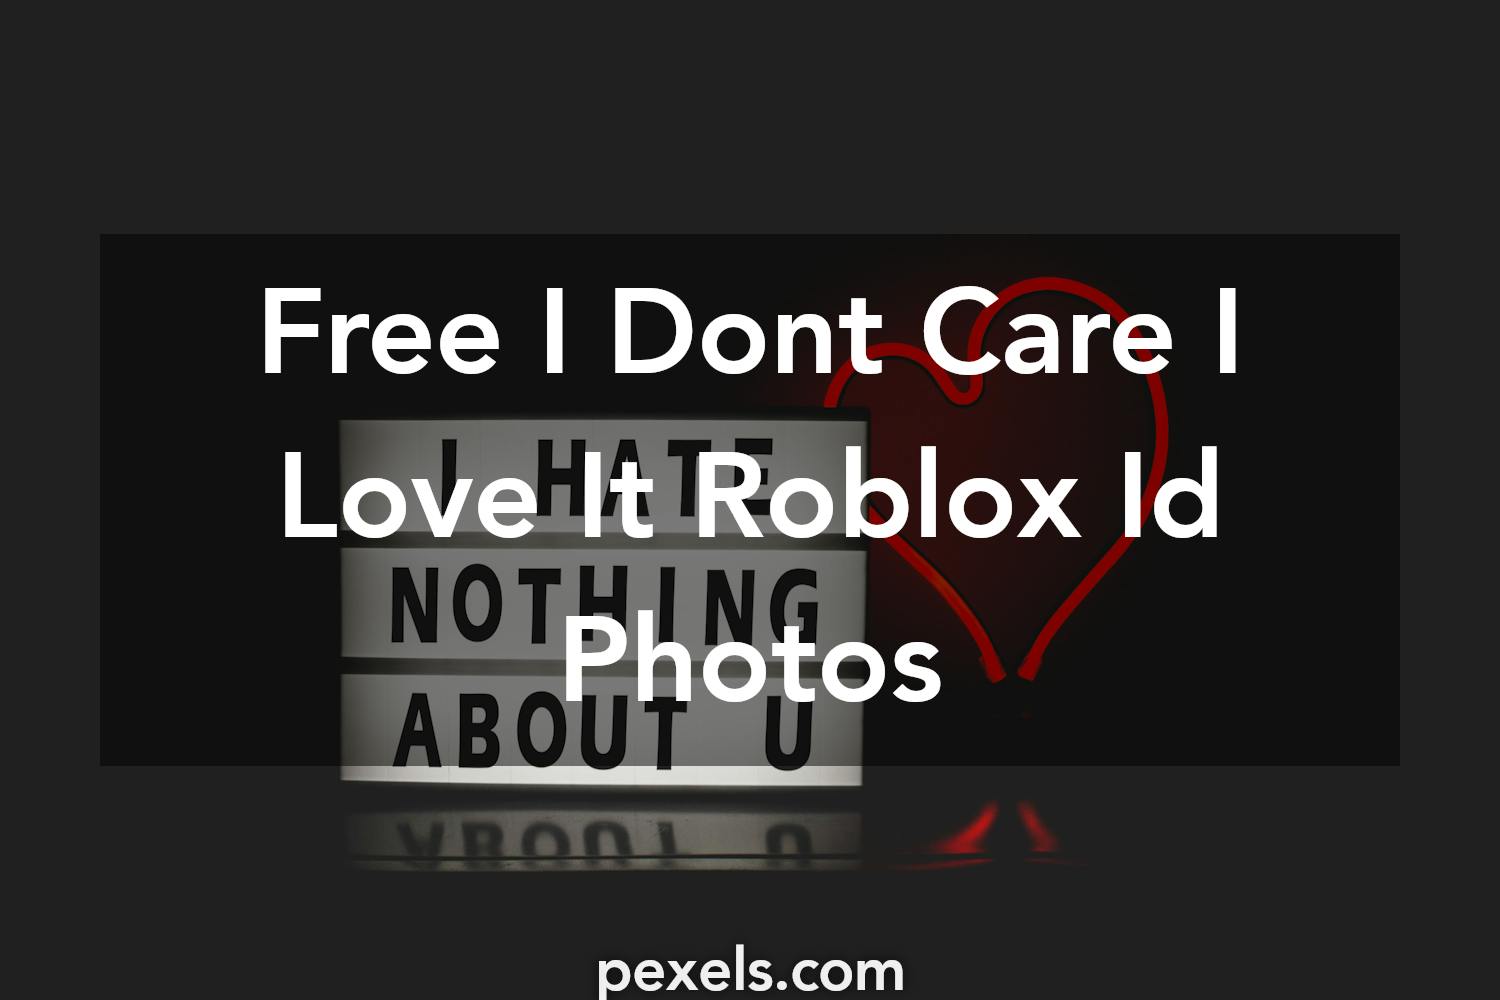 1000 Roblox Ids - roblox ids for old town road